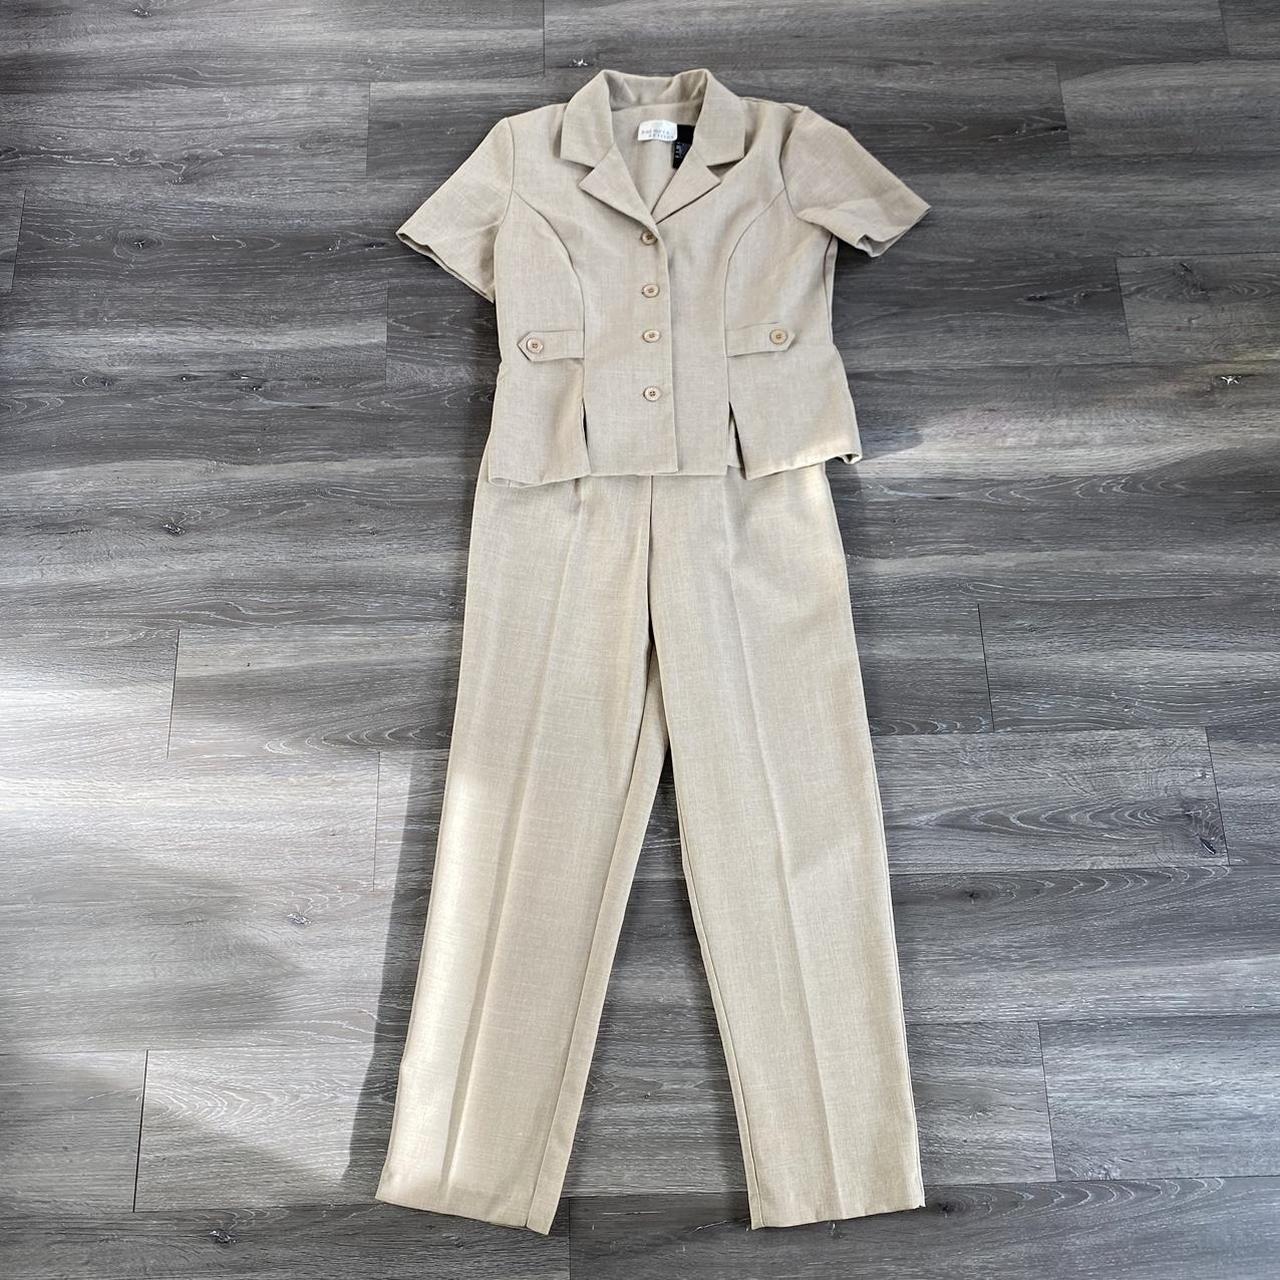 American Vintage Women's Tan and Cream Suit